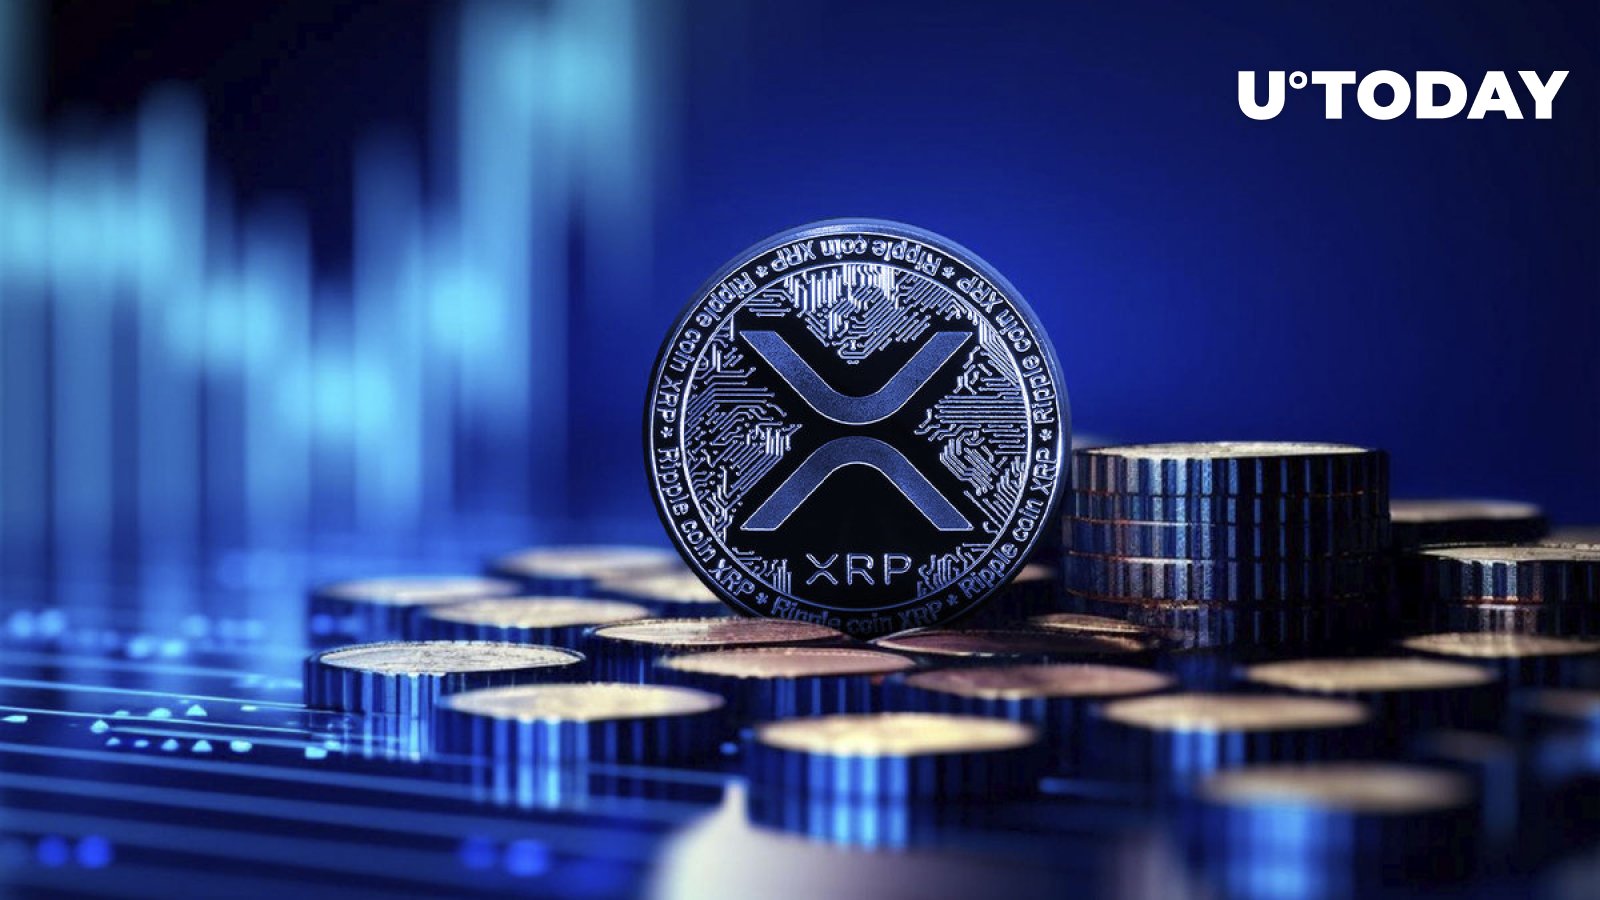 XRP Price Makes Important Recovery, But There’s a Catch